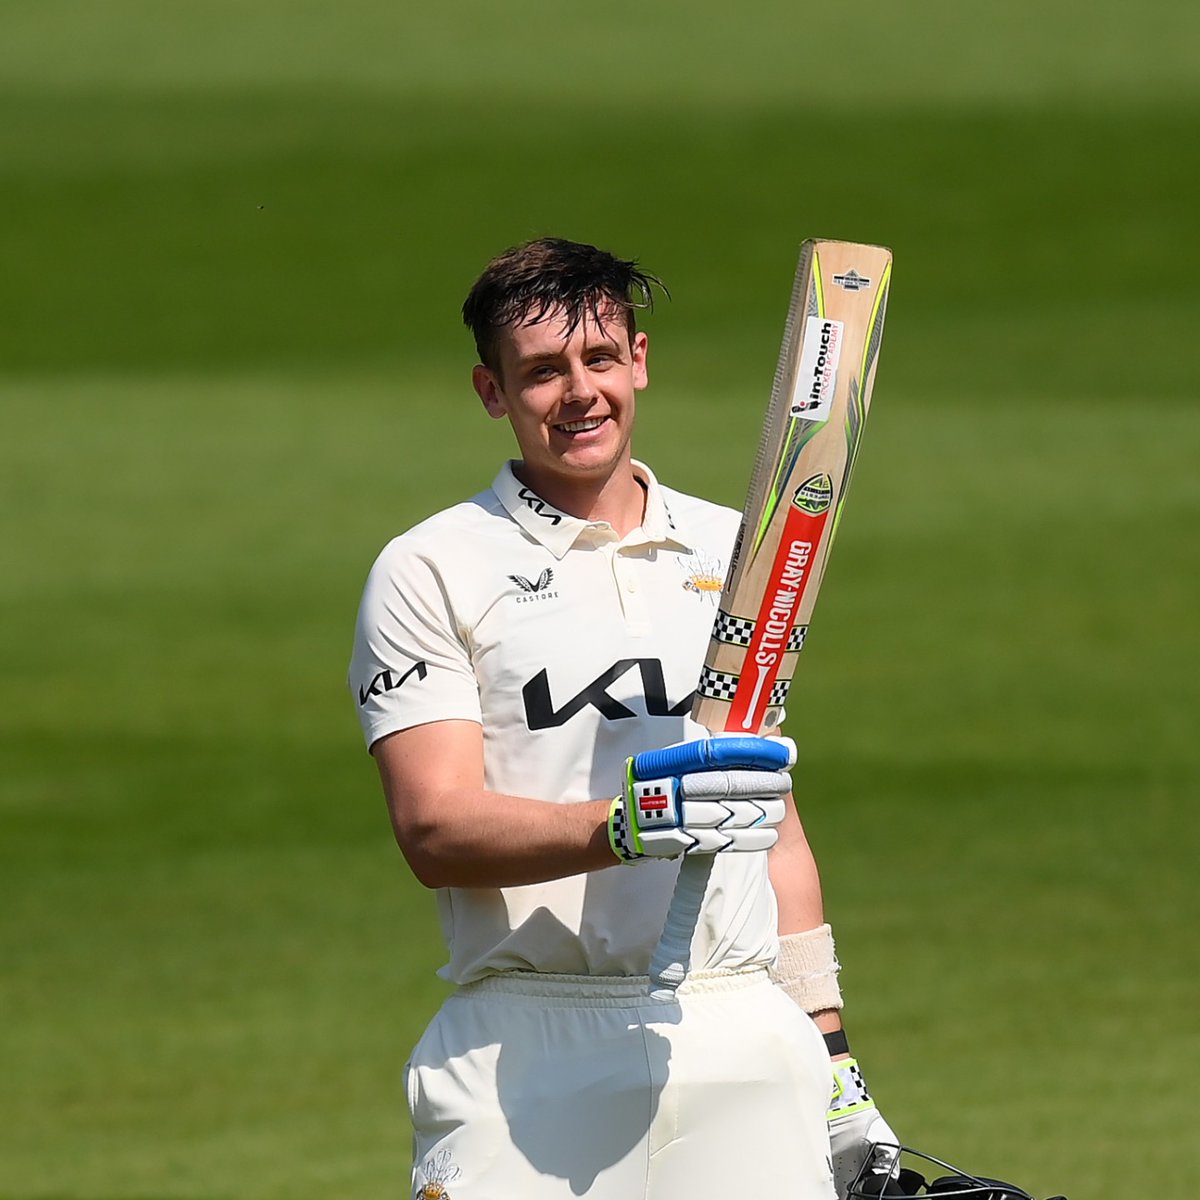 If the England keeper/batter slot is up for grabs, Jamie Smith (averaging 64.40 @ 91.47 so far in County Championship) is doing a fine job auditioning for it. #cricket